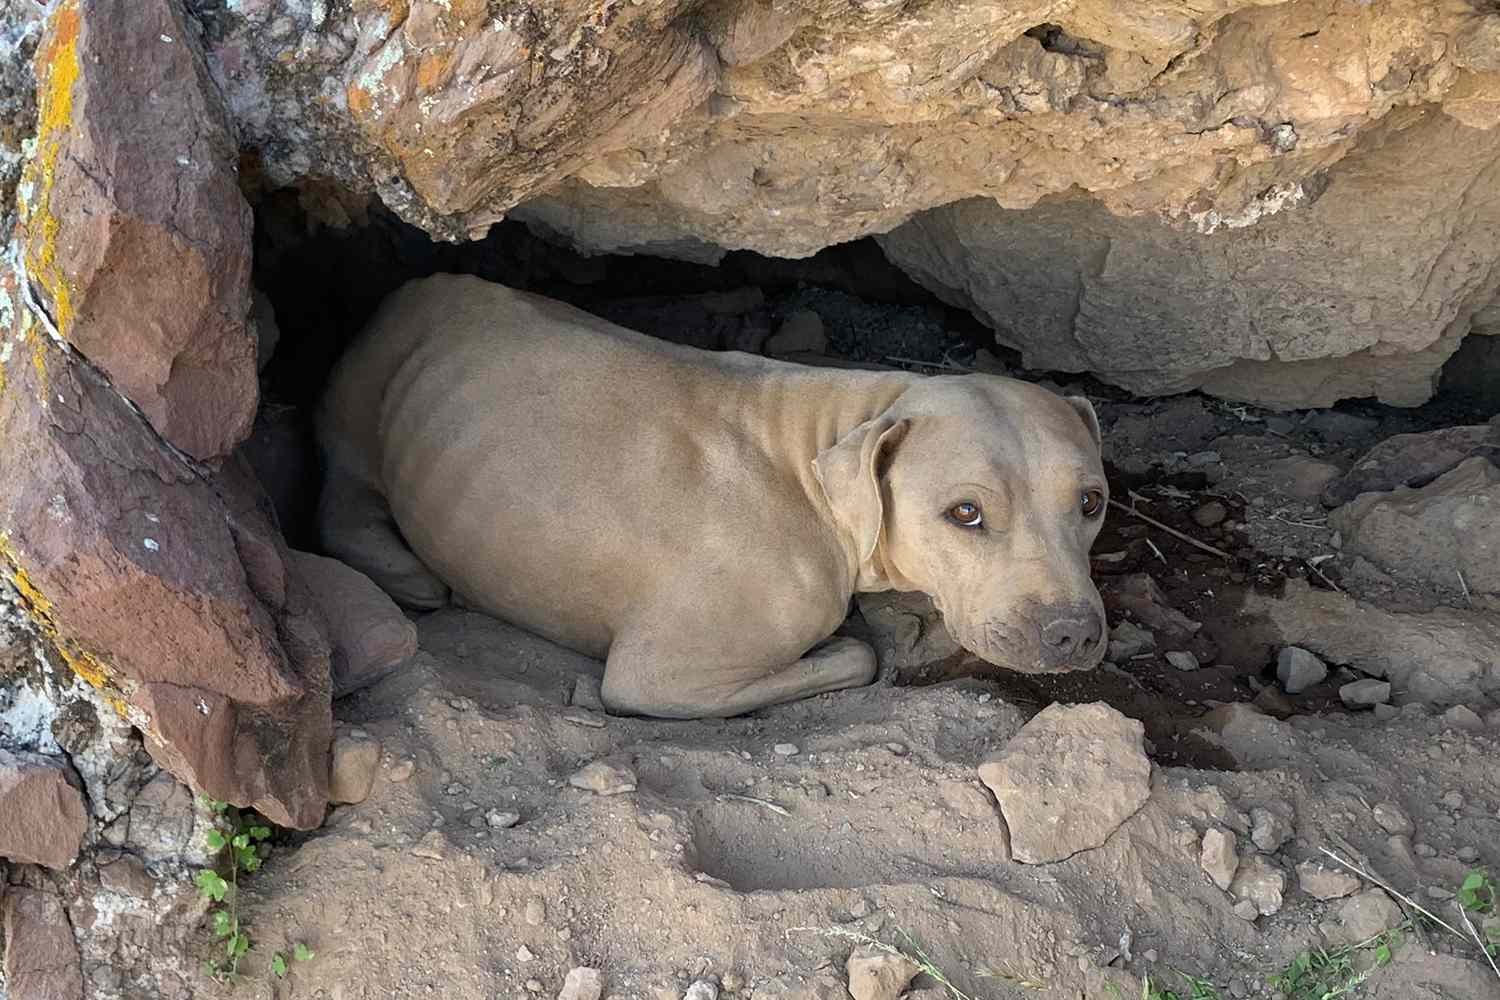 Dog Rescued After Being Found Hiding in Small Cutout on Side of Mountain in Arizona